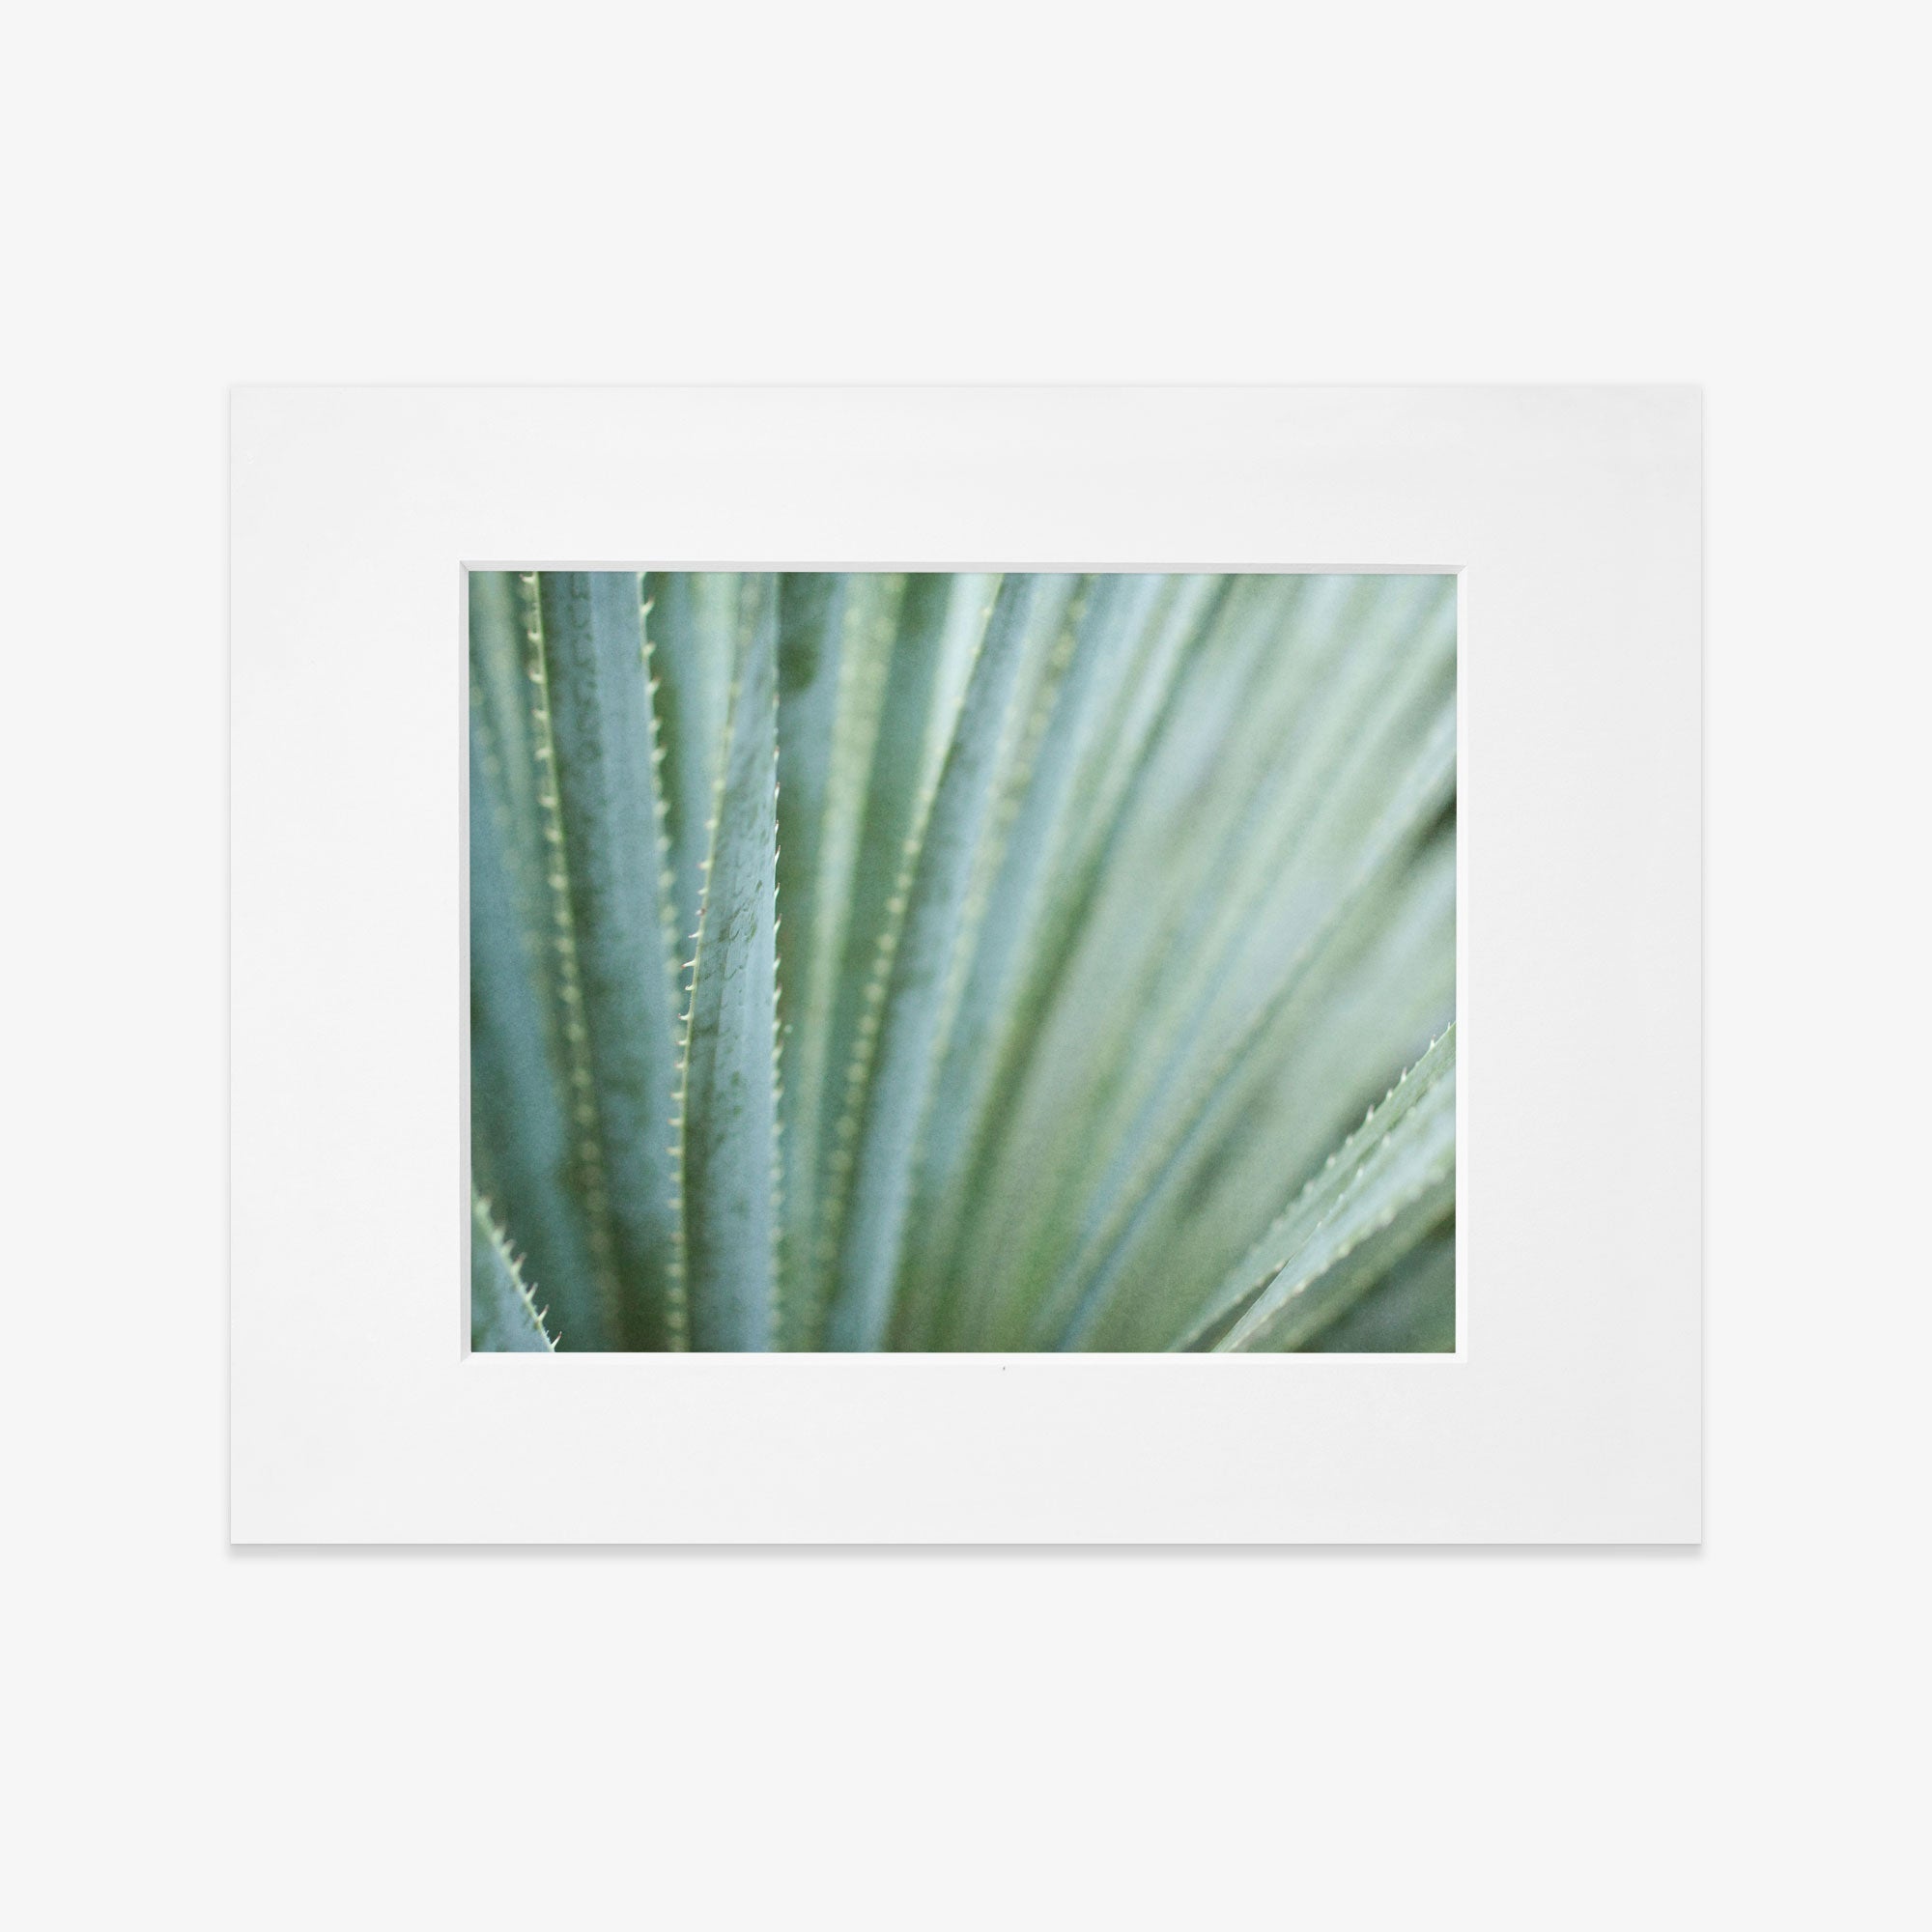 A close-up photo of a green succulent plant with long, narrow leaves featuring white spiky edges, printed on archival photographic paper by Offley Green.